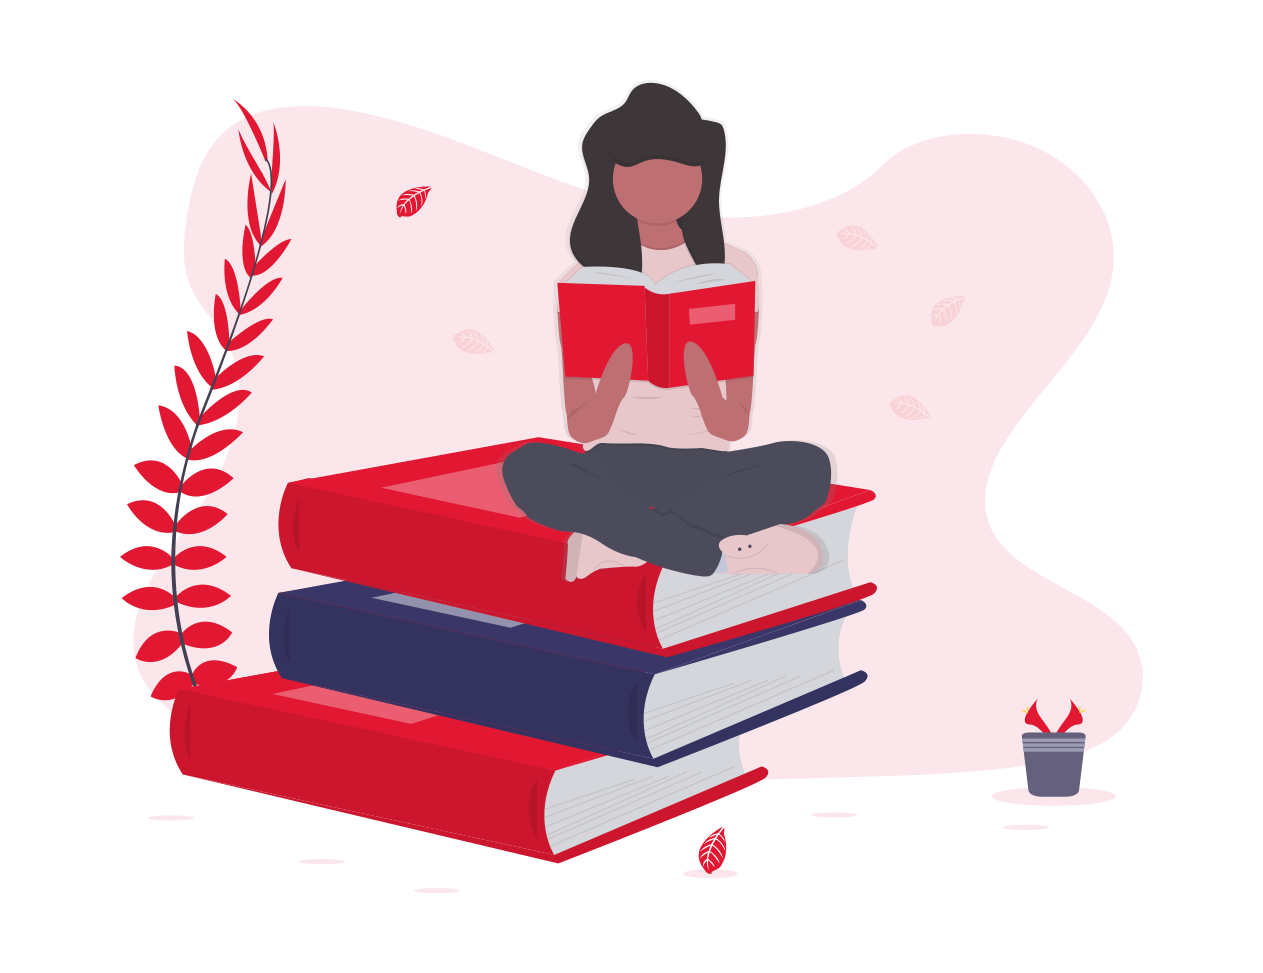 Person sitting on an oversized stack of books, Illustration from undraw.com